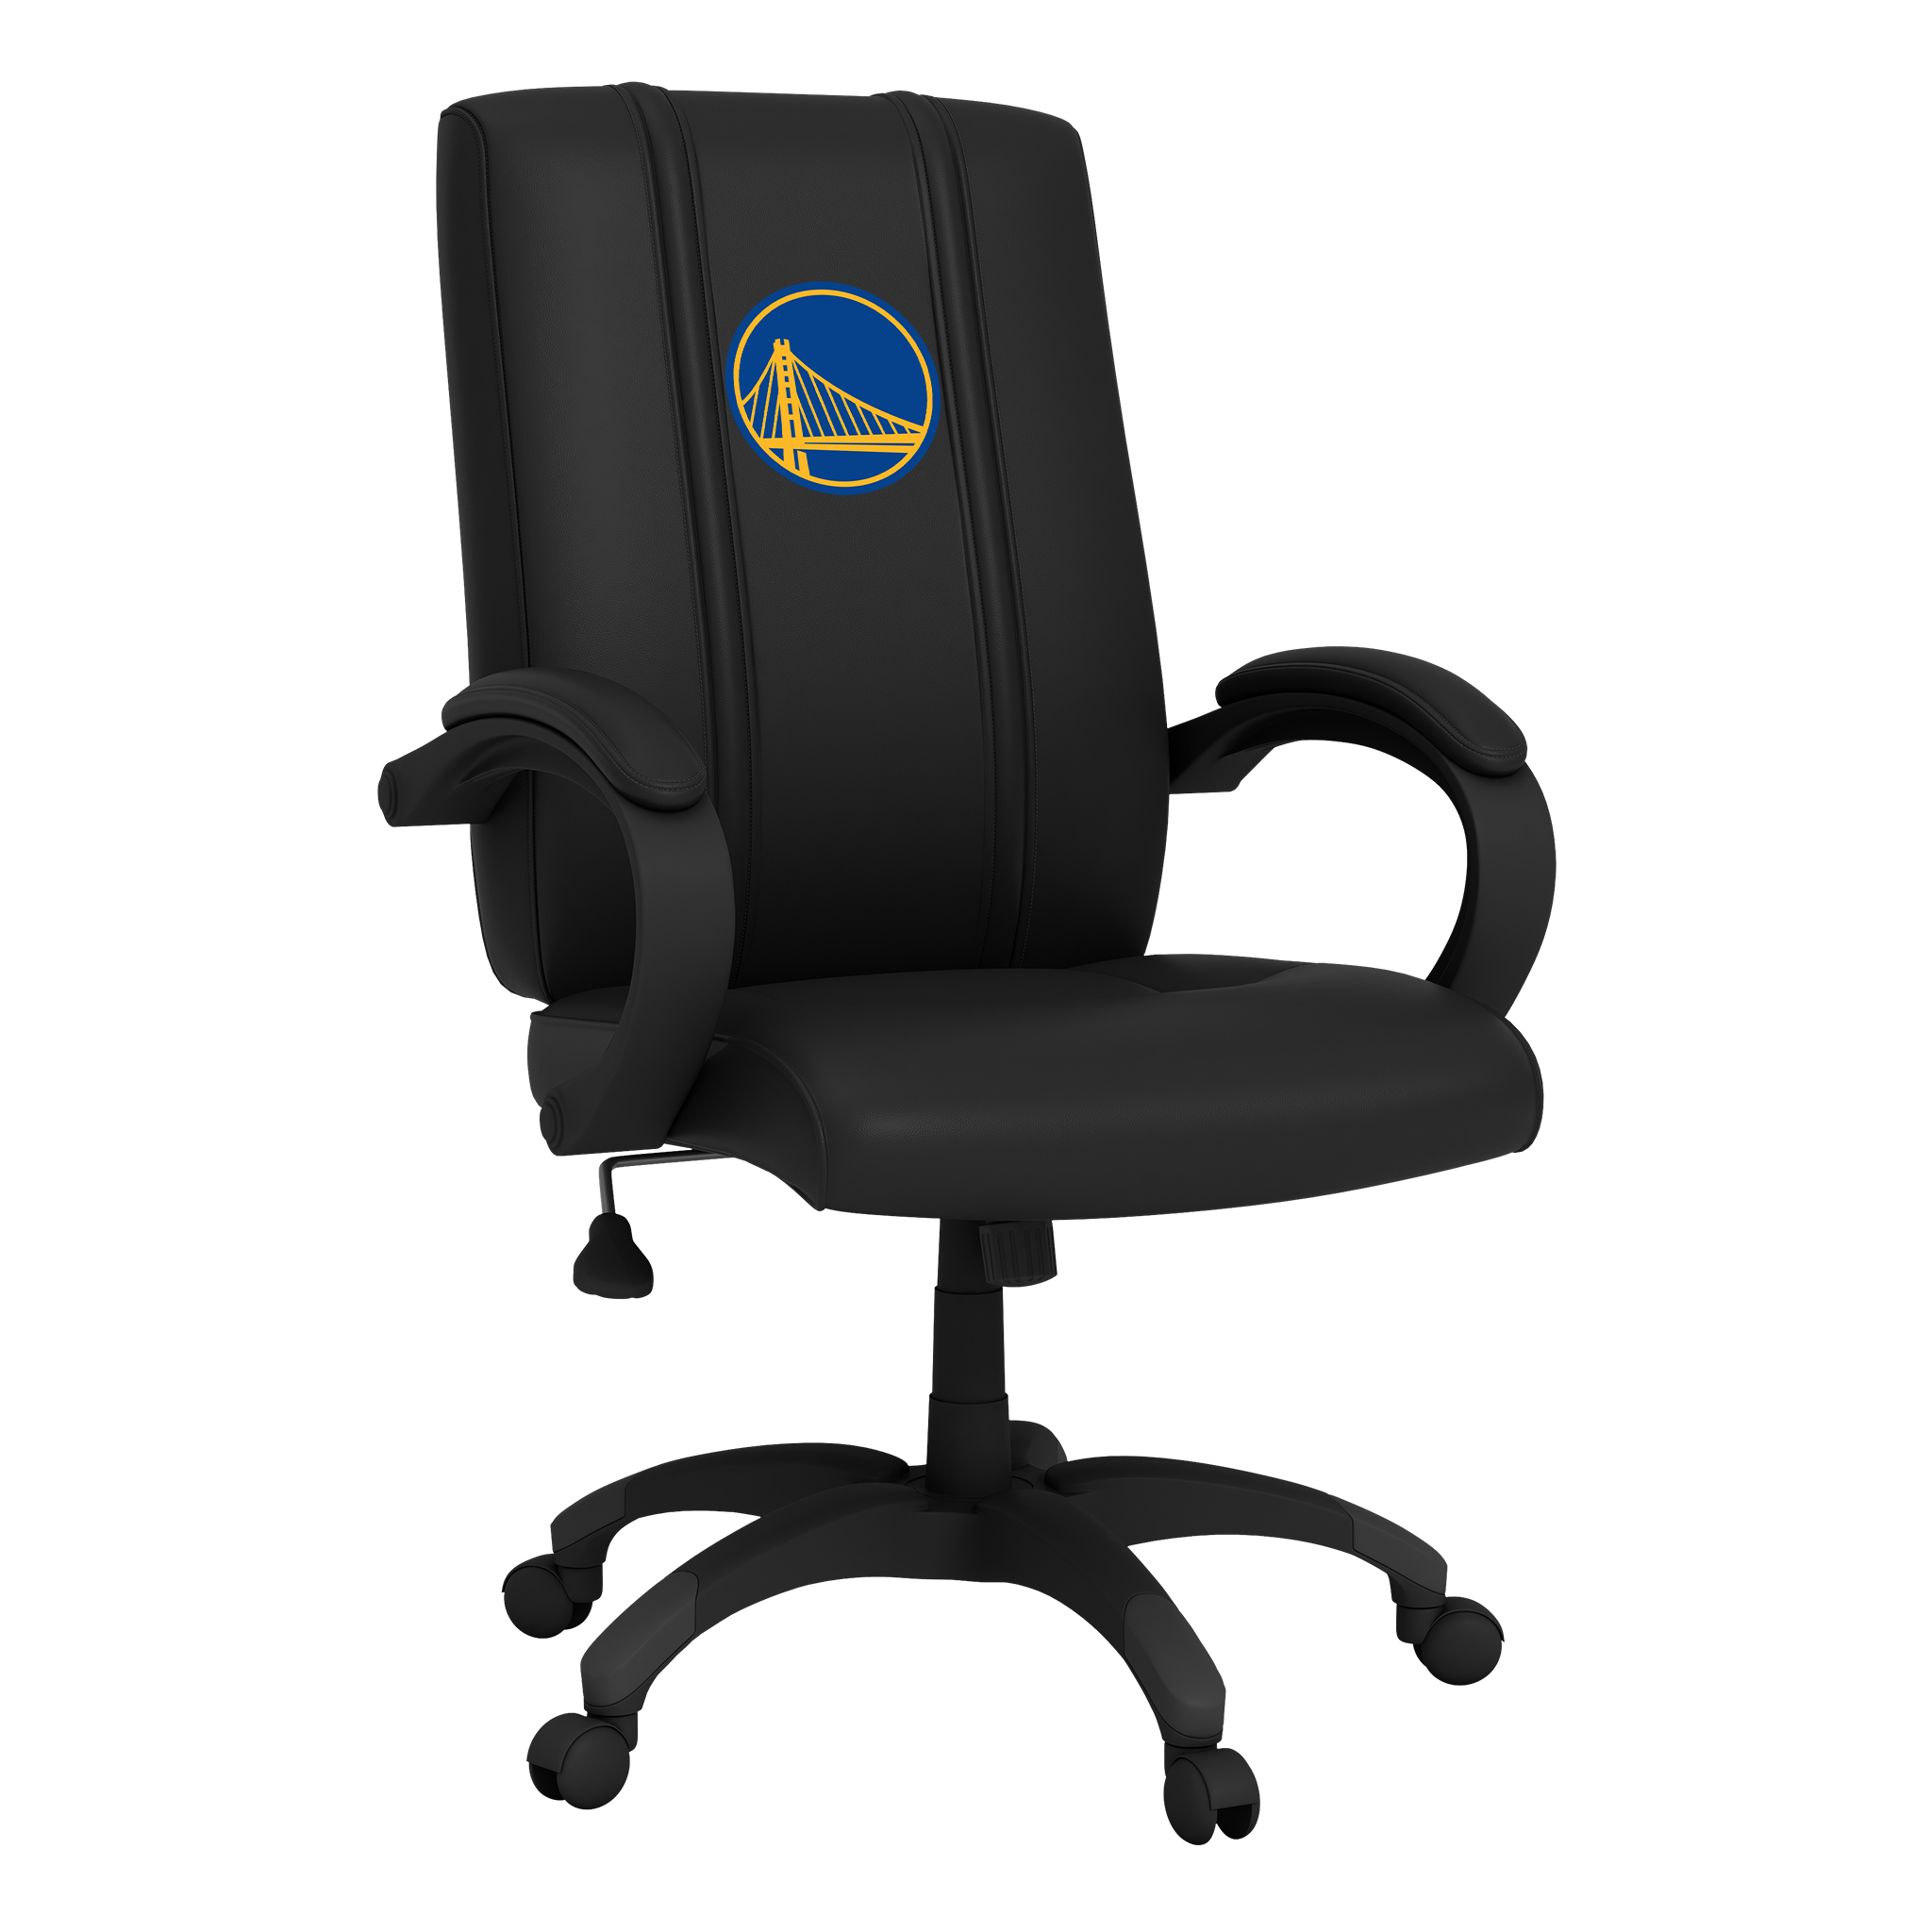 Golden State Warriors Office Chair 1000 with Golden State Warriors Logo